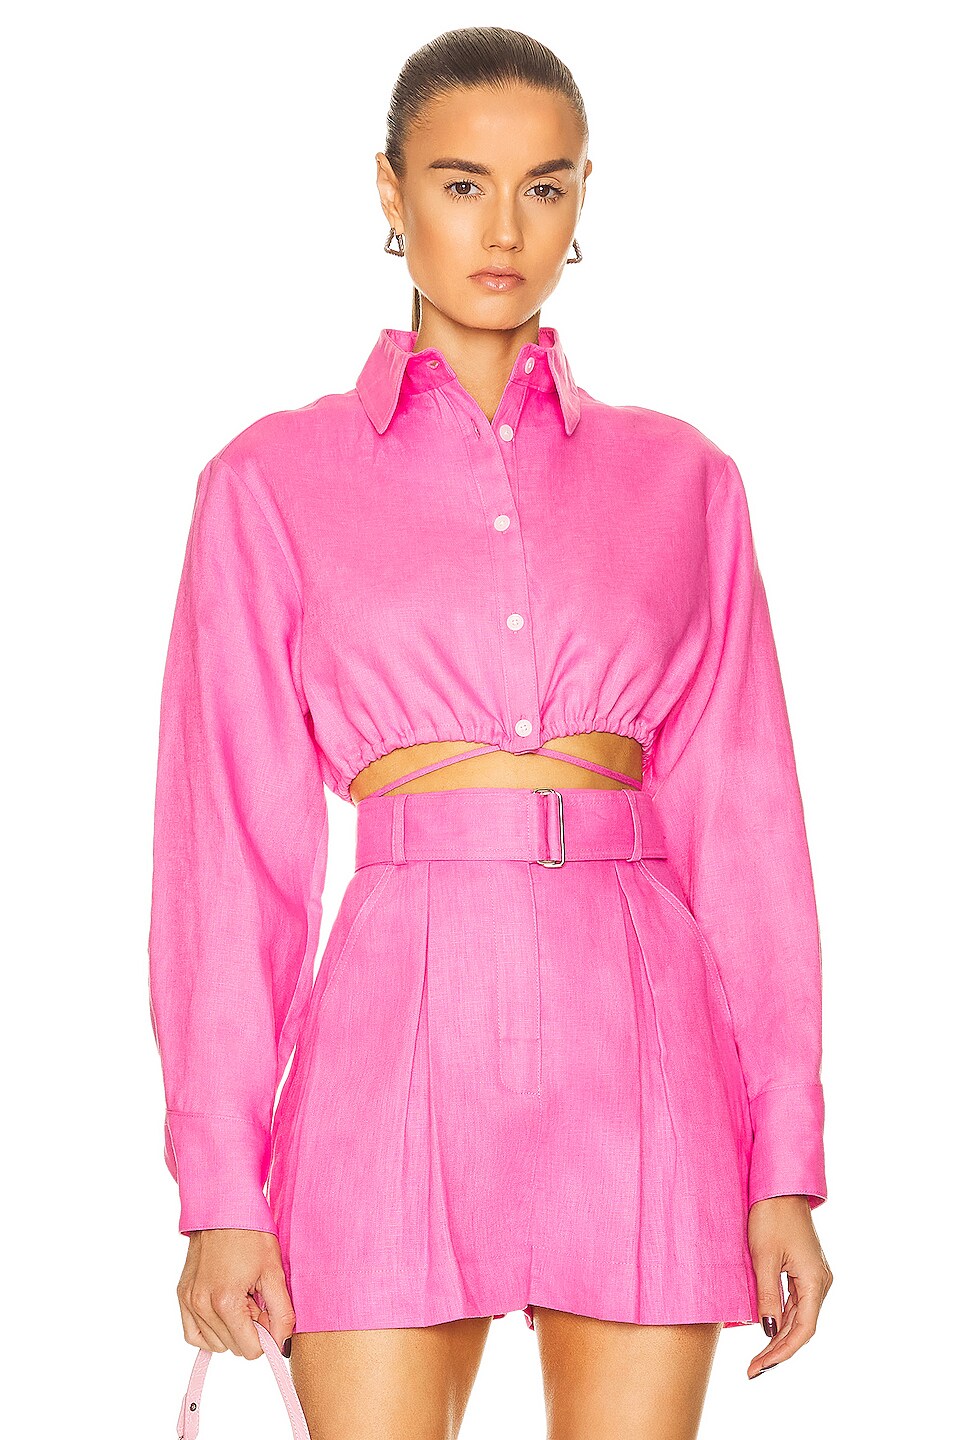 MATTHEW BRUCH for FWRD Long Sleeve Cropped Button Down Top in Hot Pink ...